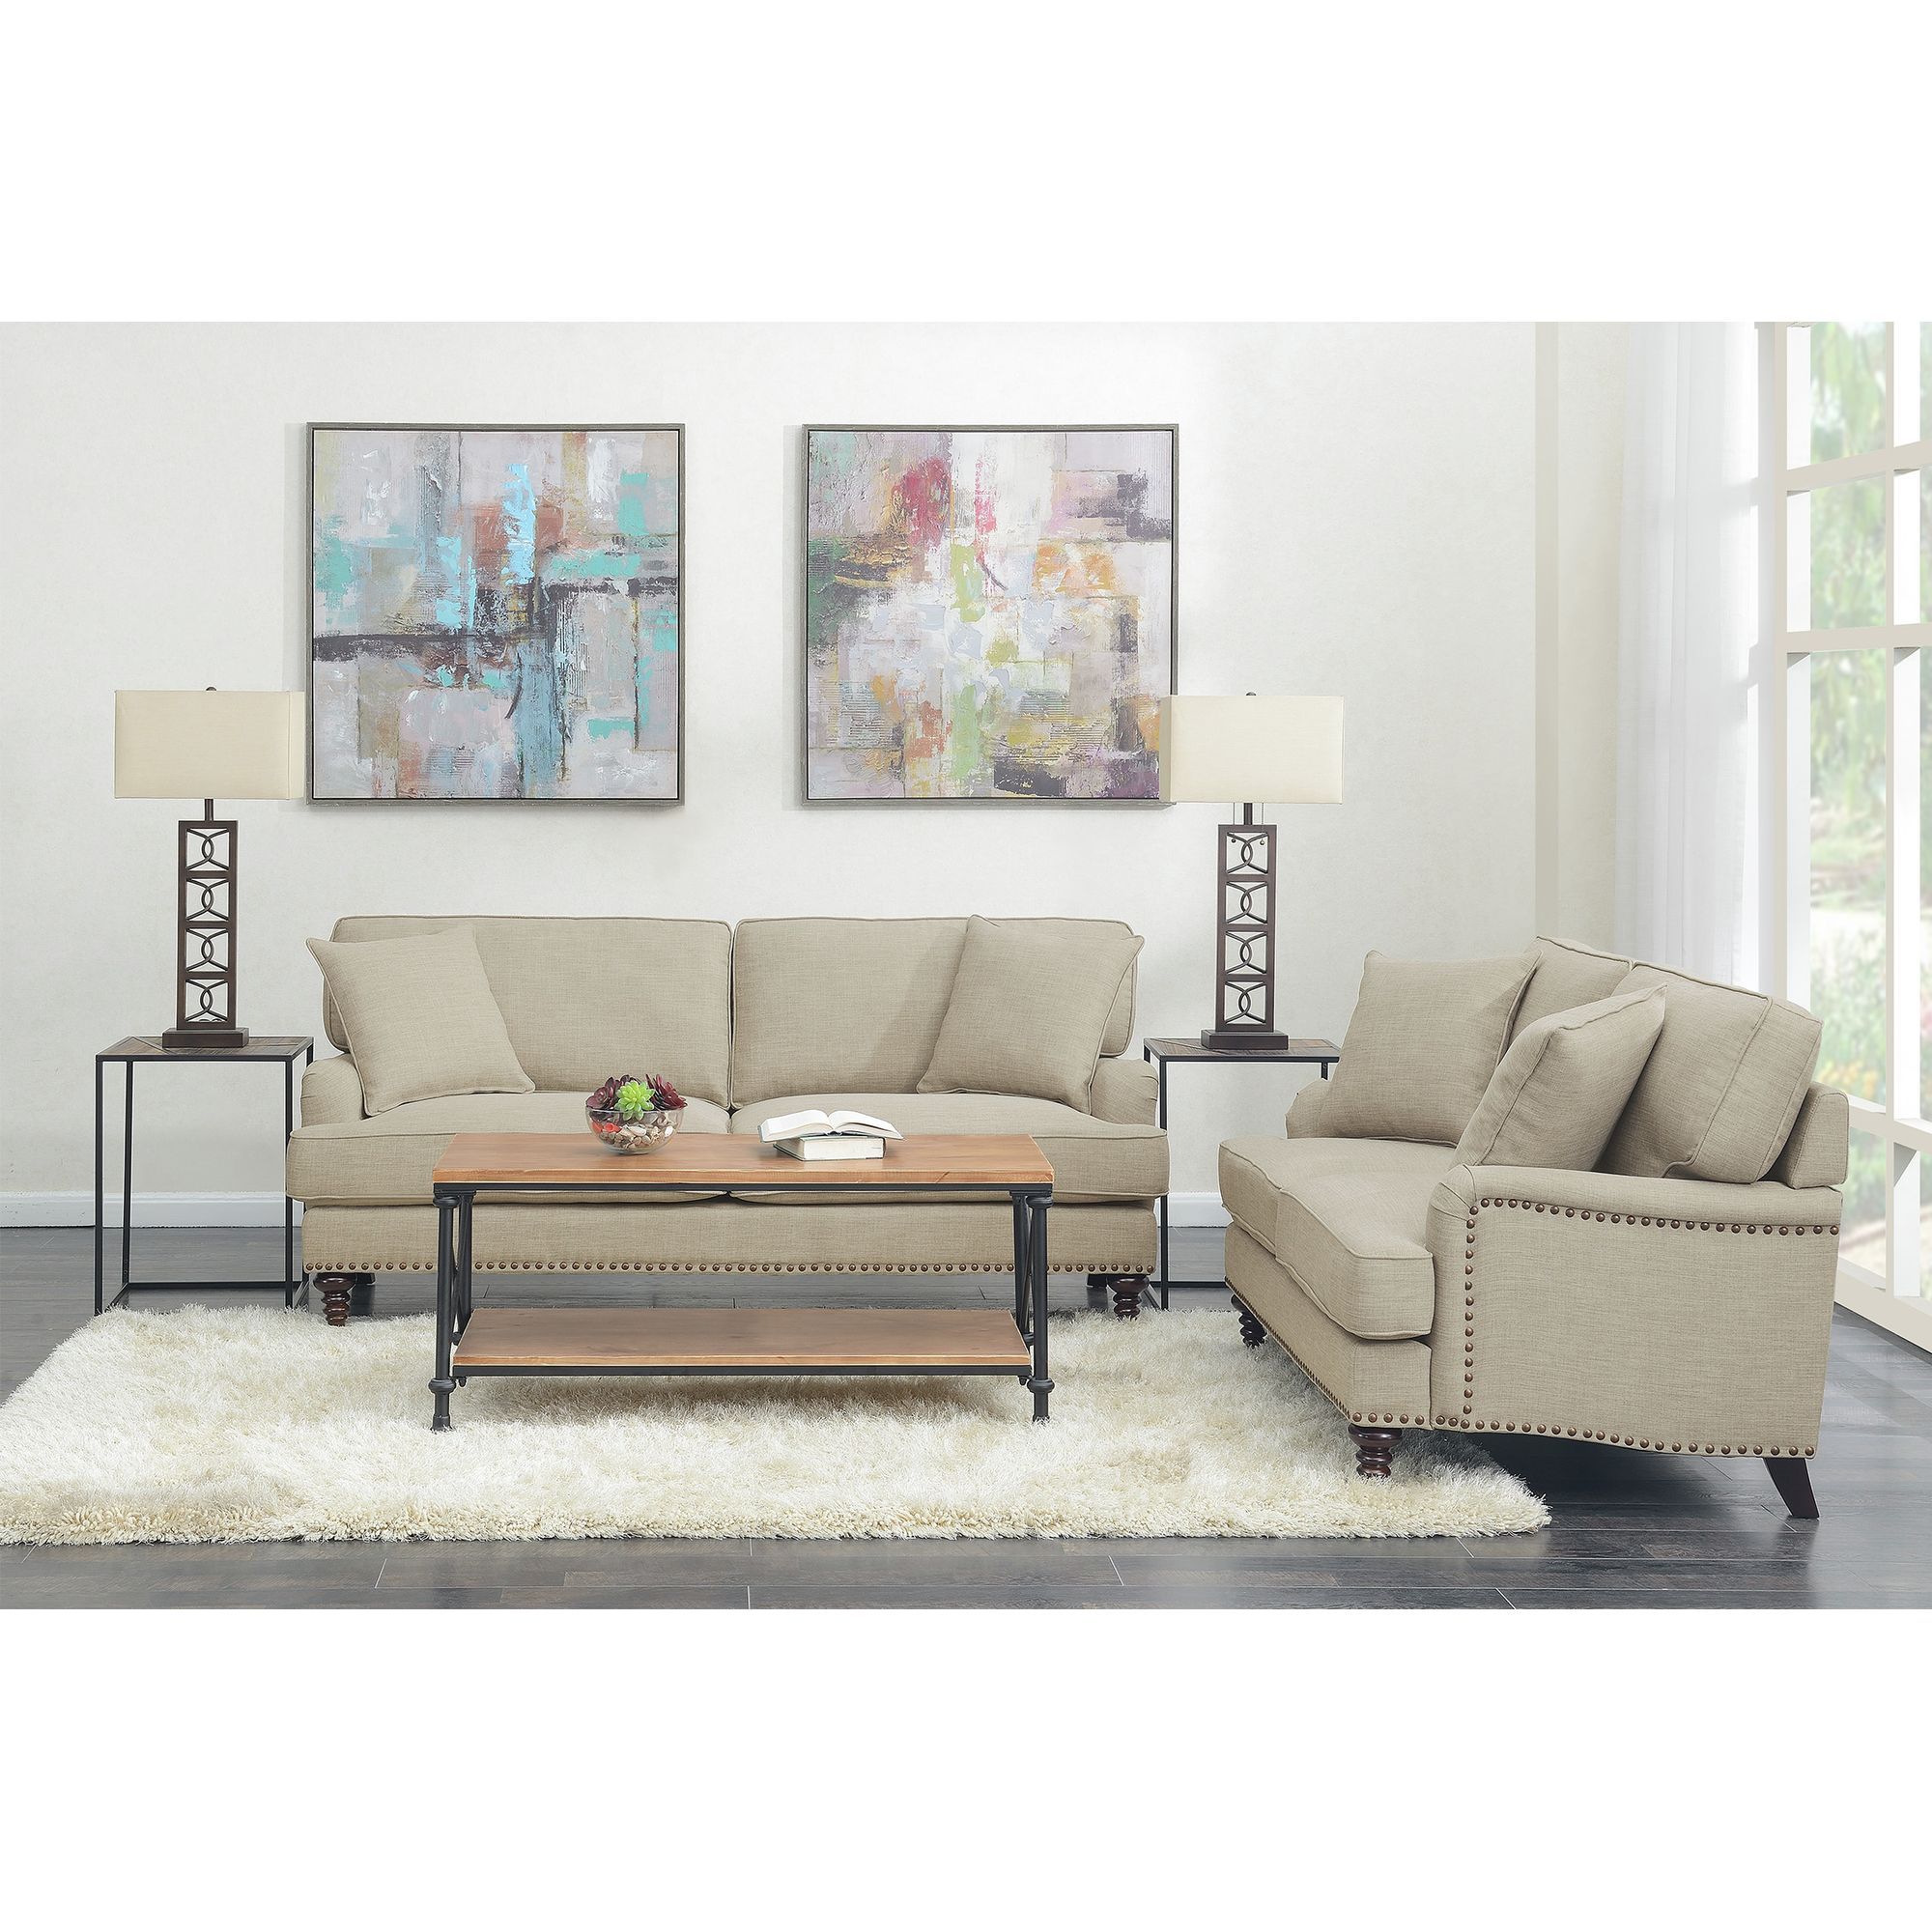 Abby 2PC Set-Sofa & Loveseat in Natural